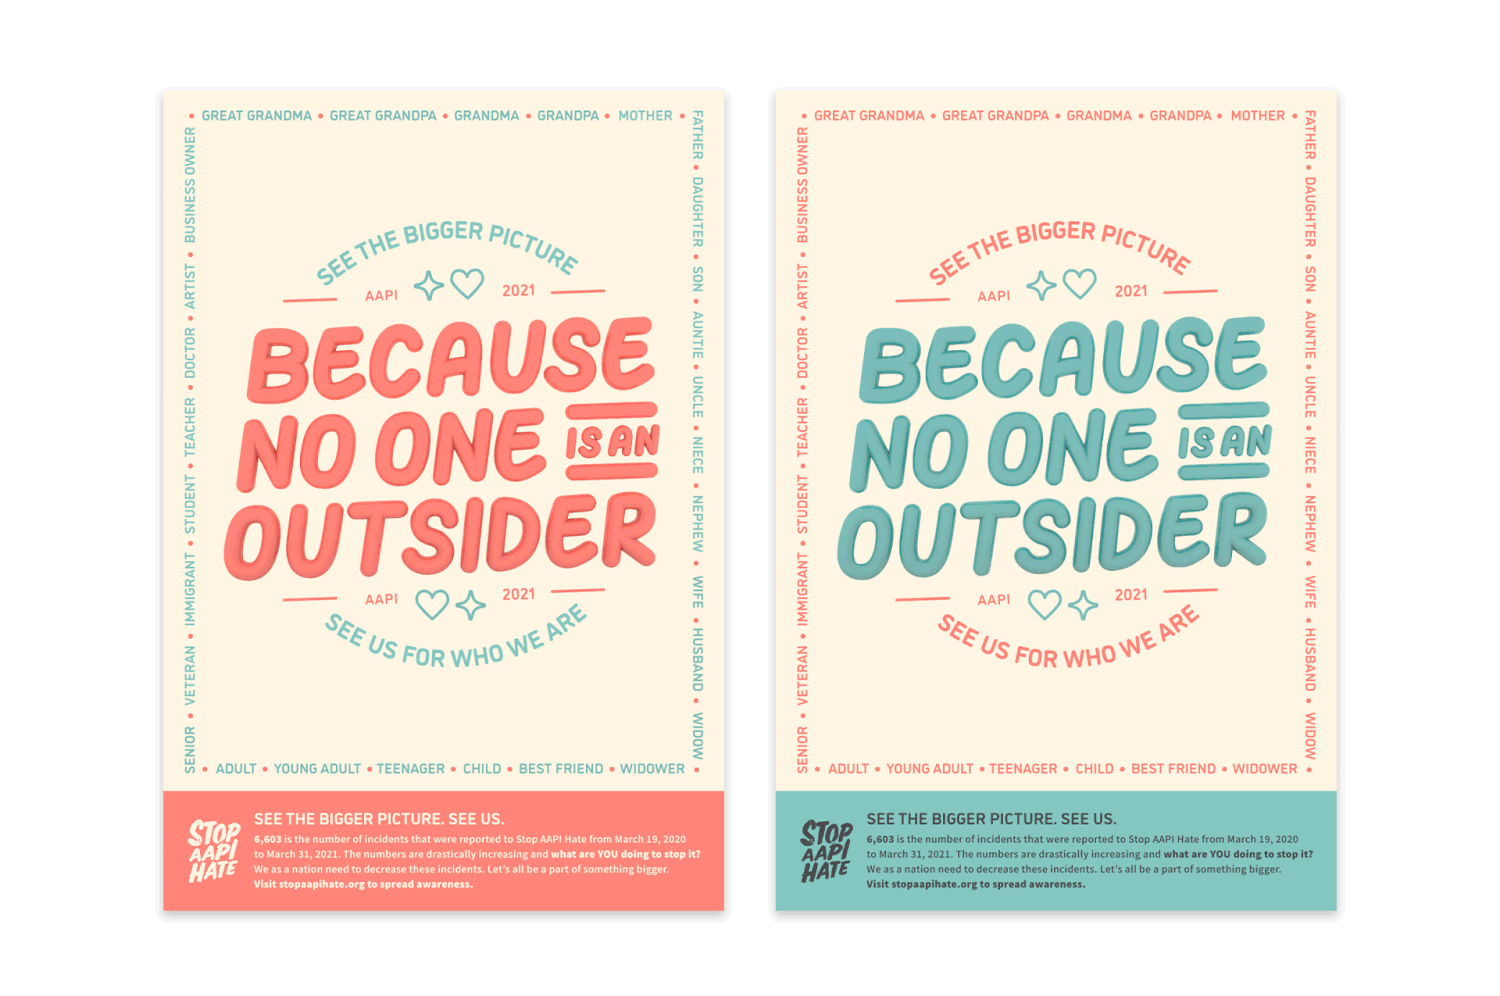 A graphic design sign says "Because No One Is An Outsider" in salmon and pale green font.